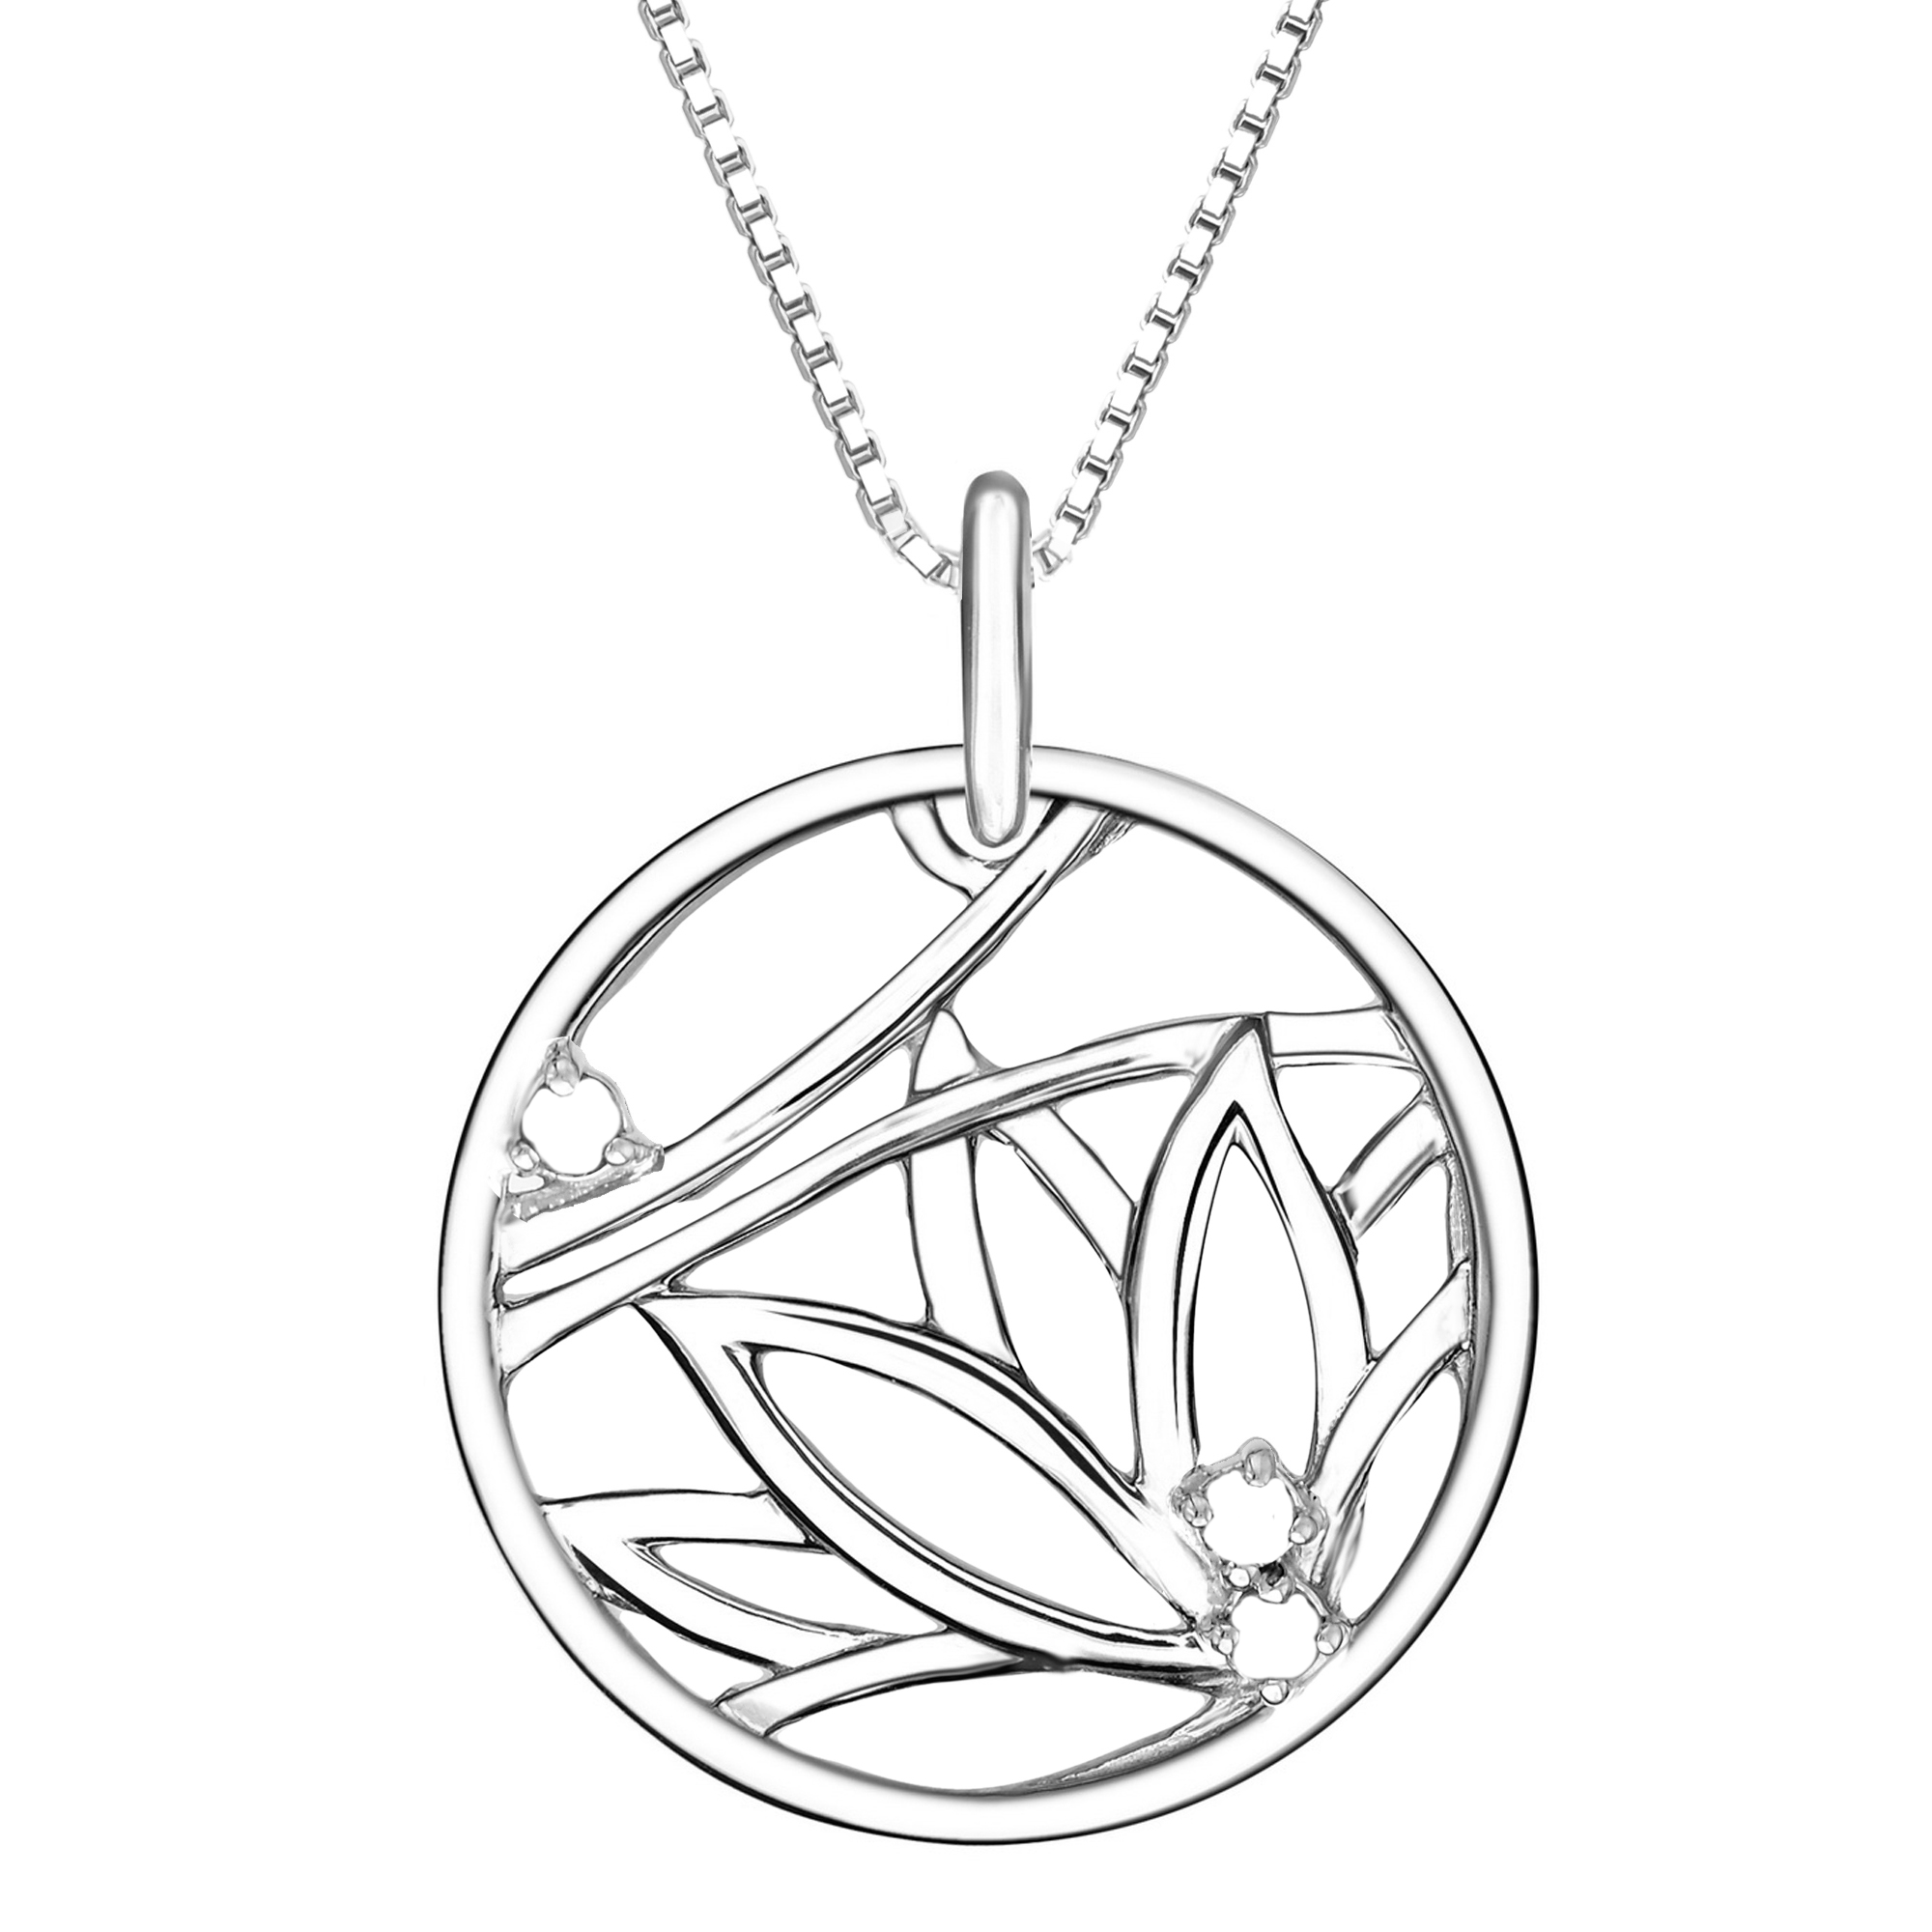 Trail necklace with 3 Specials flowers pendant cast in 18K rose